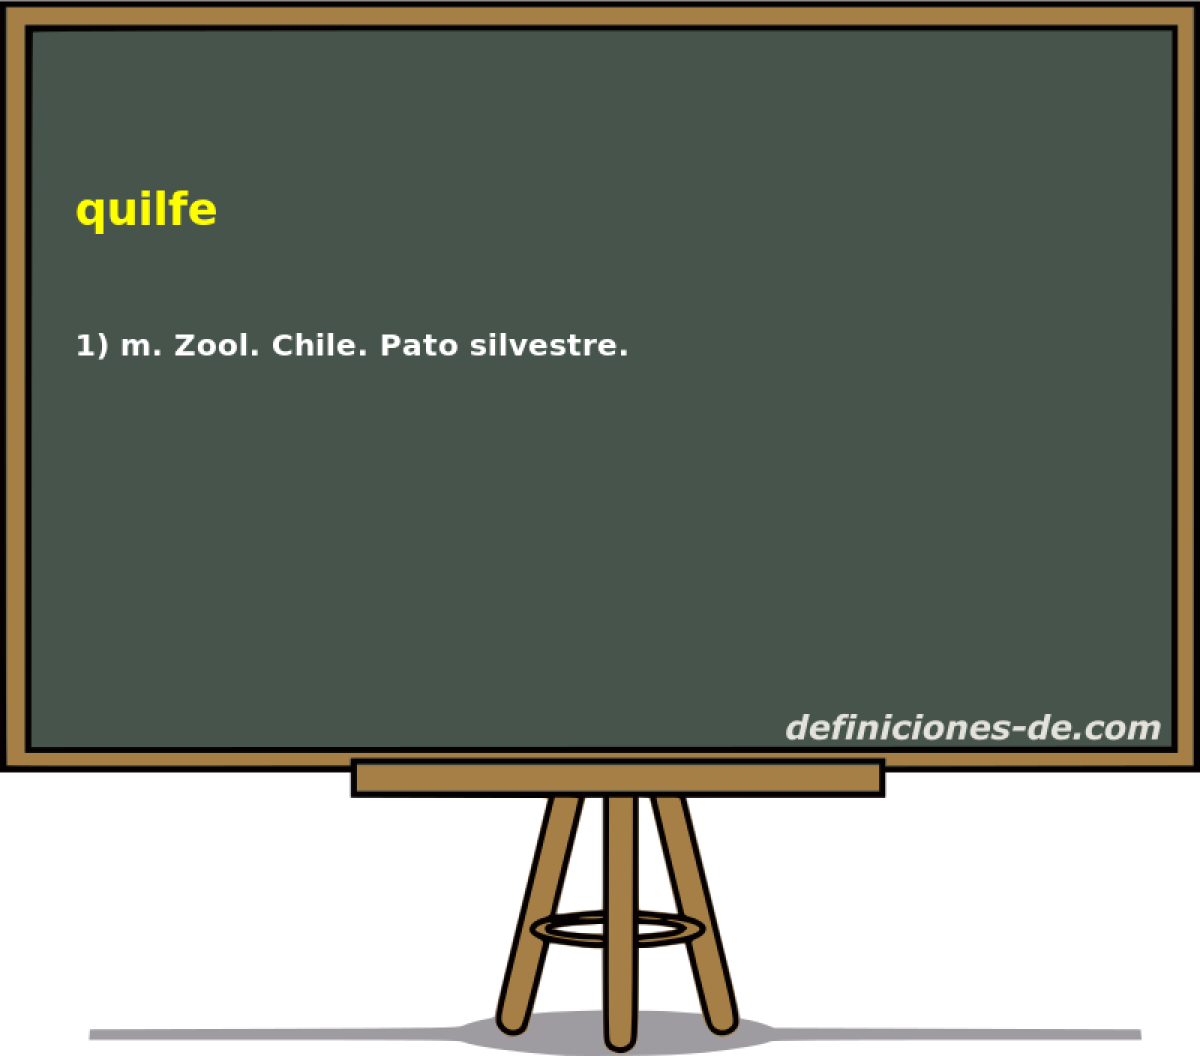 quilfe 